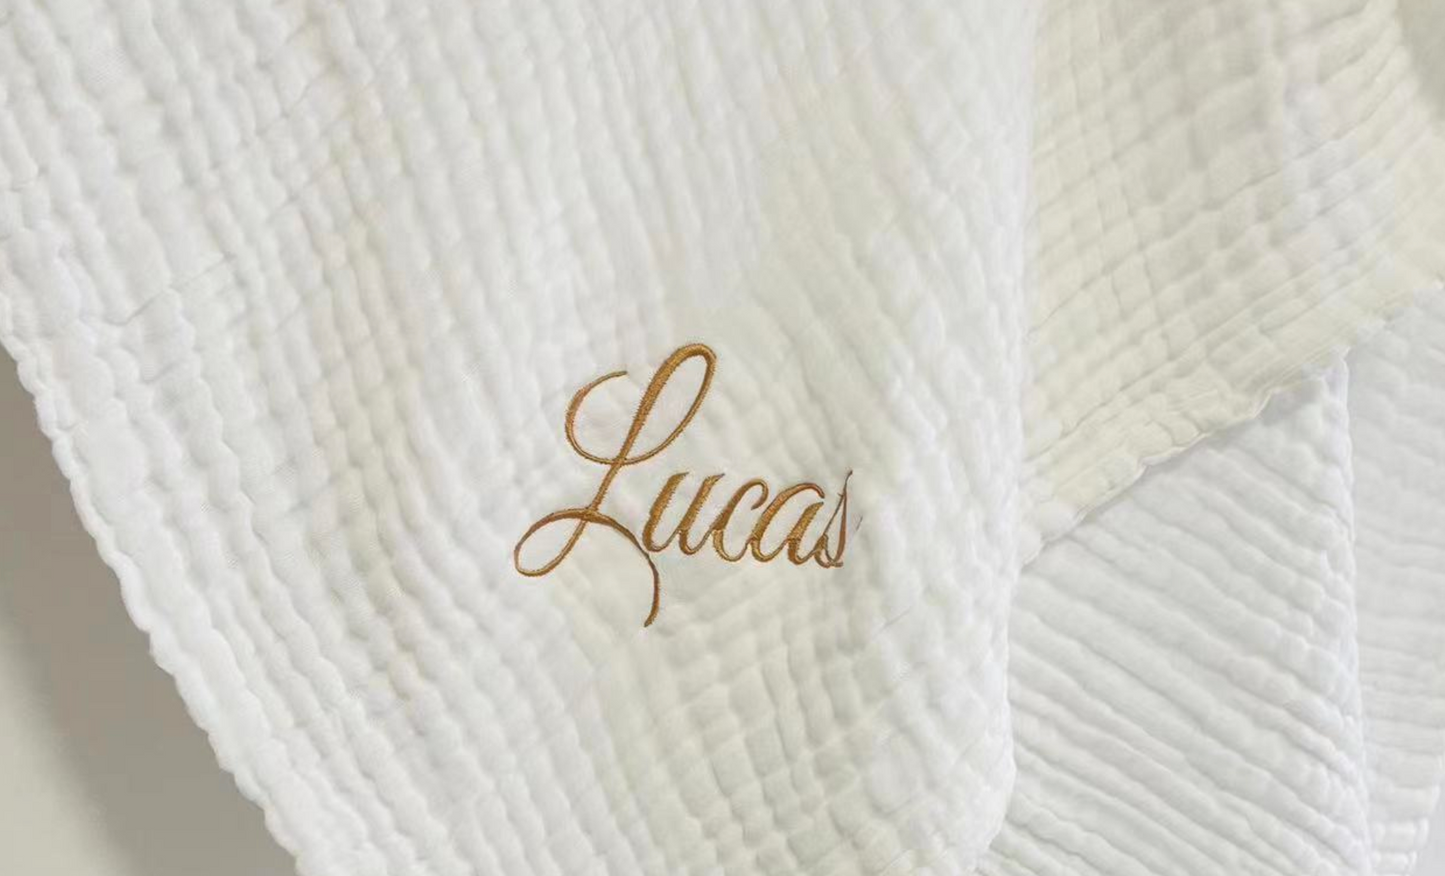 Embroidered Muslin Baby Swaddle